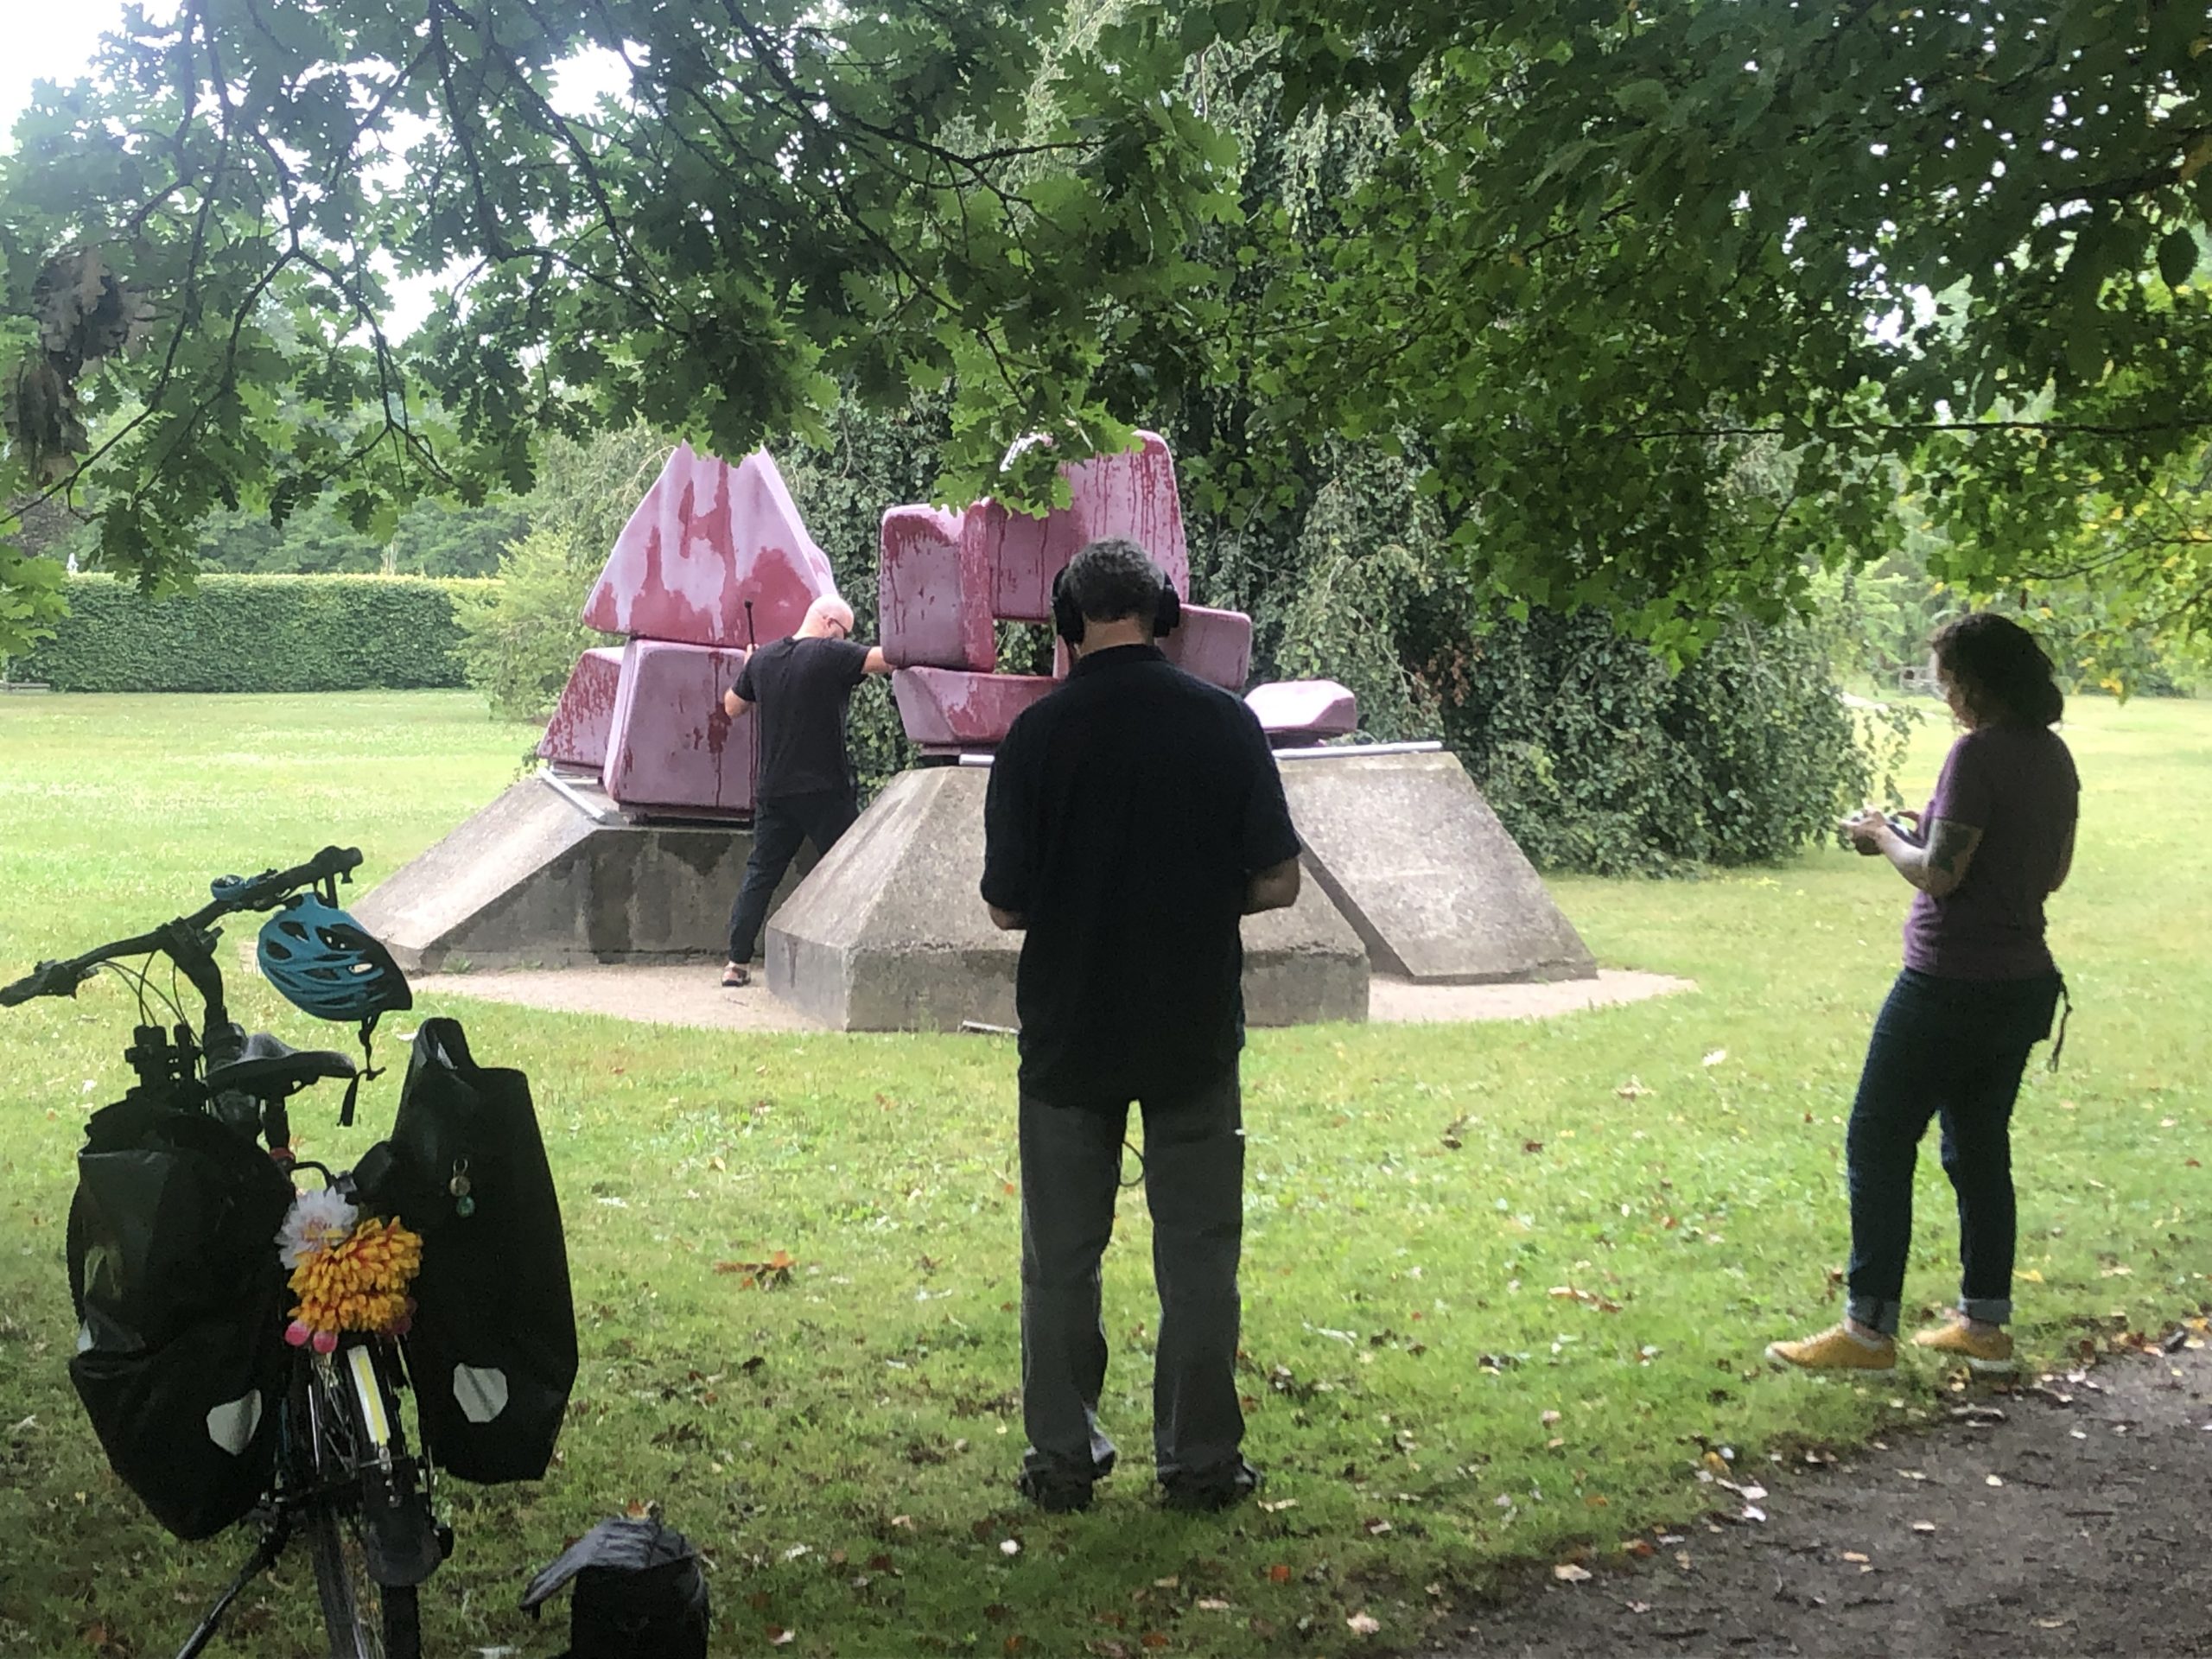 colour photo of people around a sculpture in a park